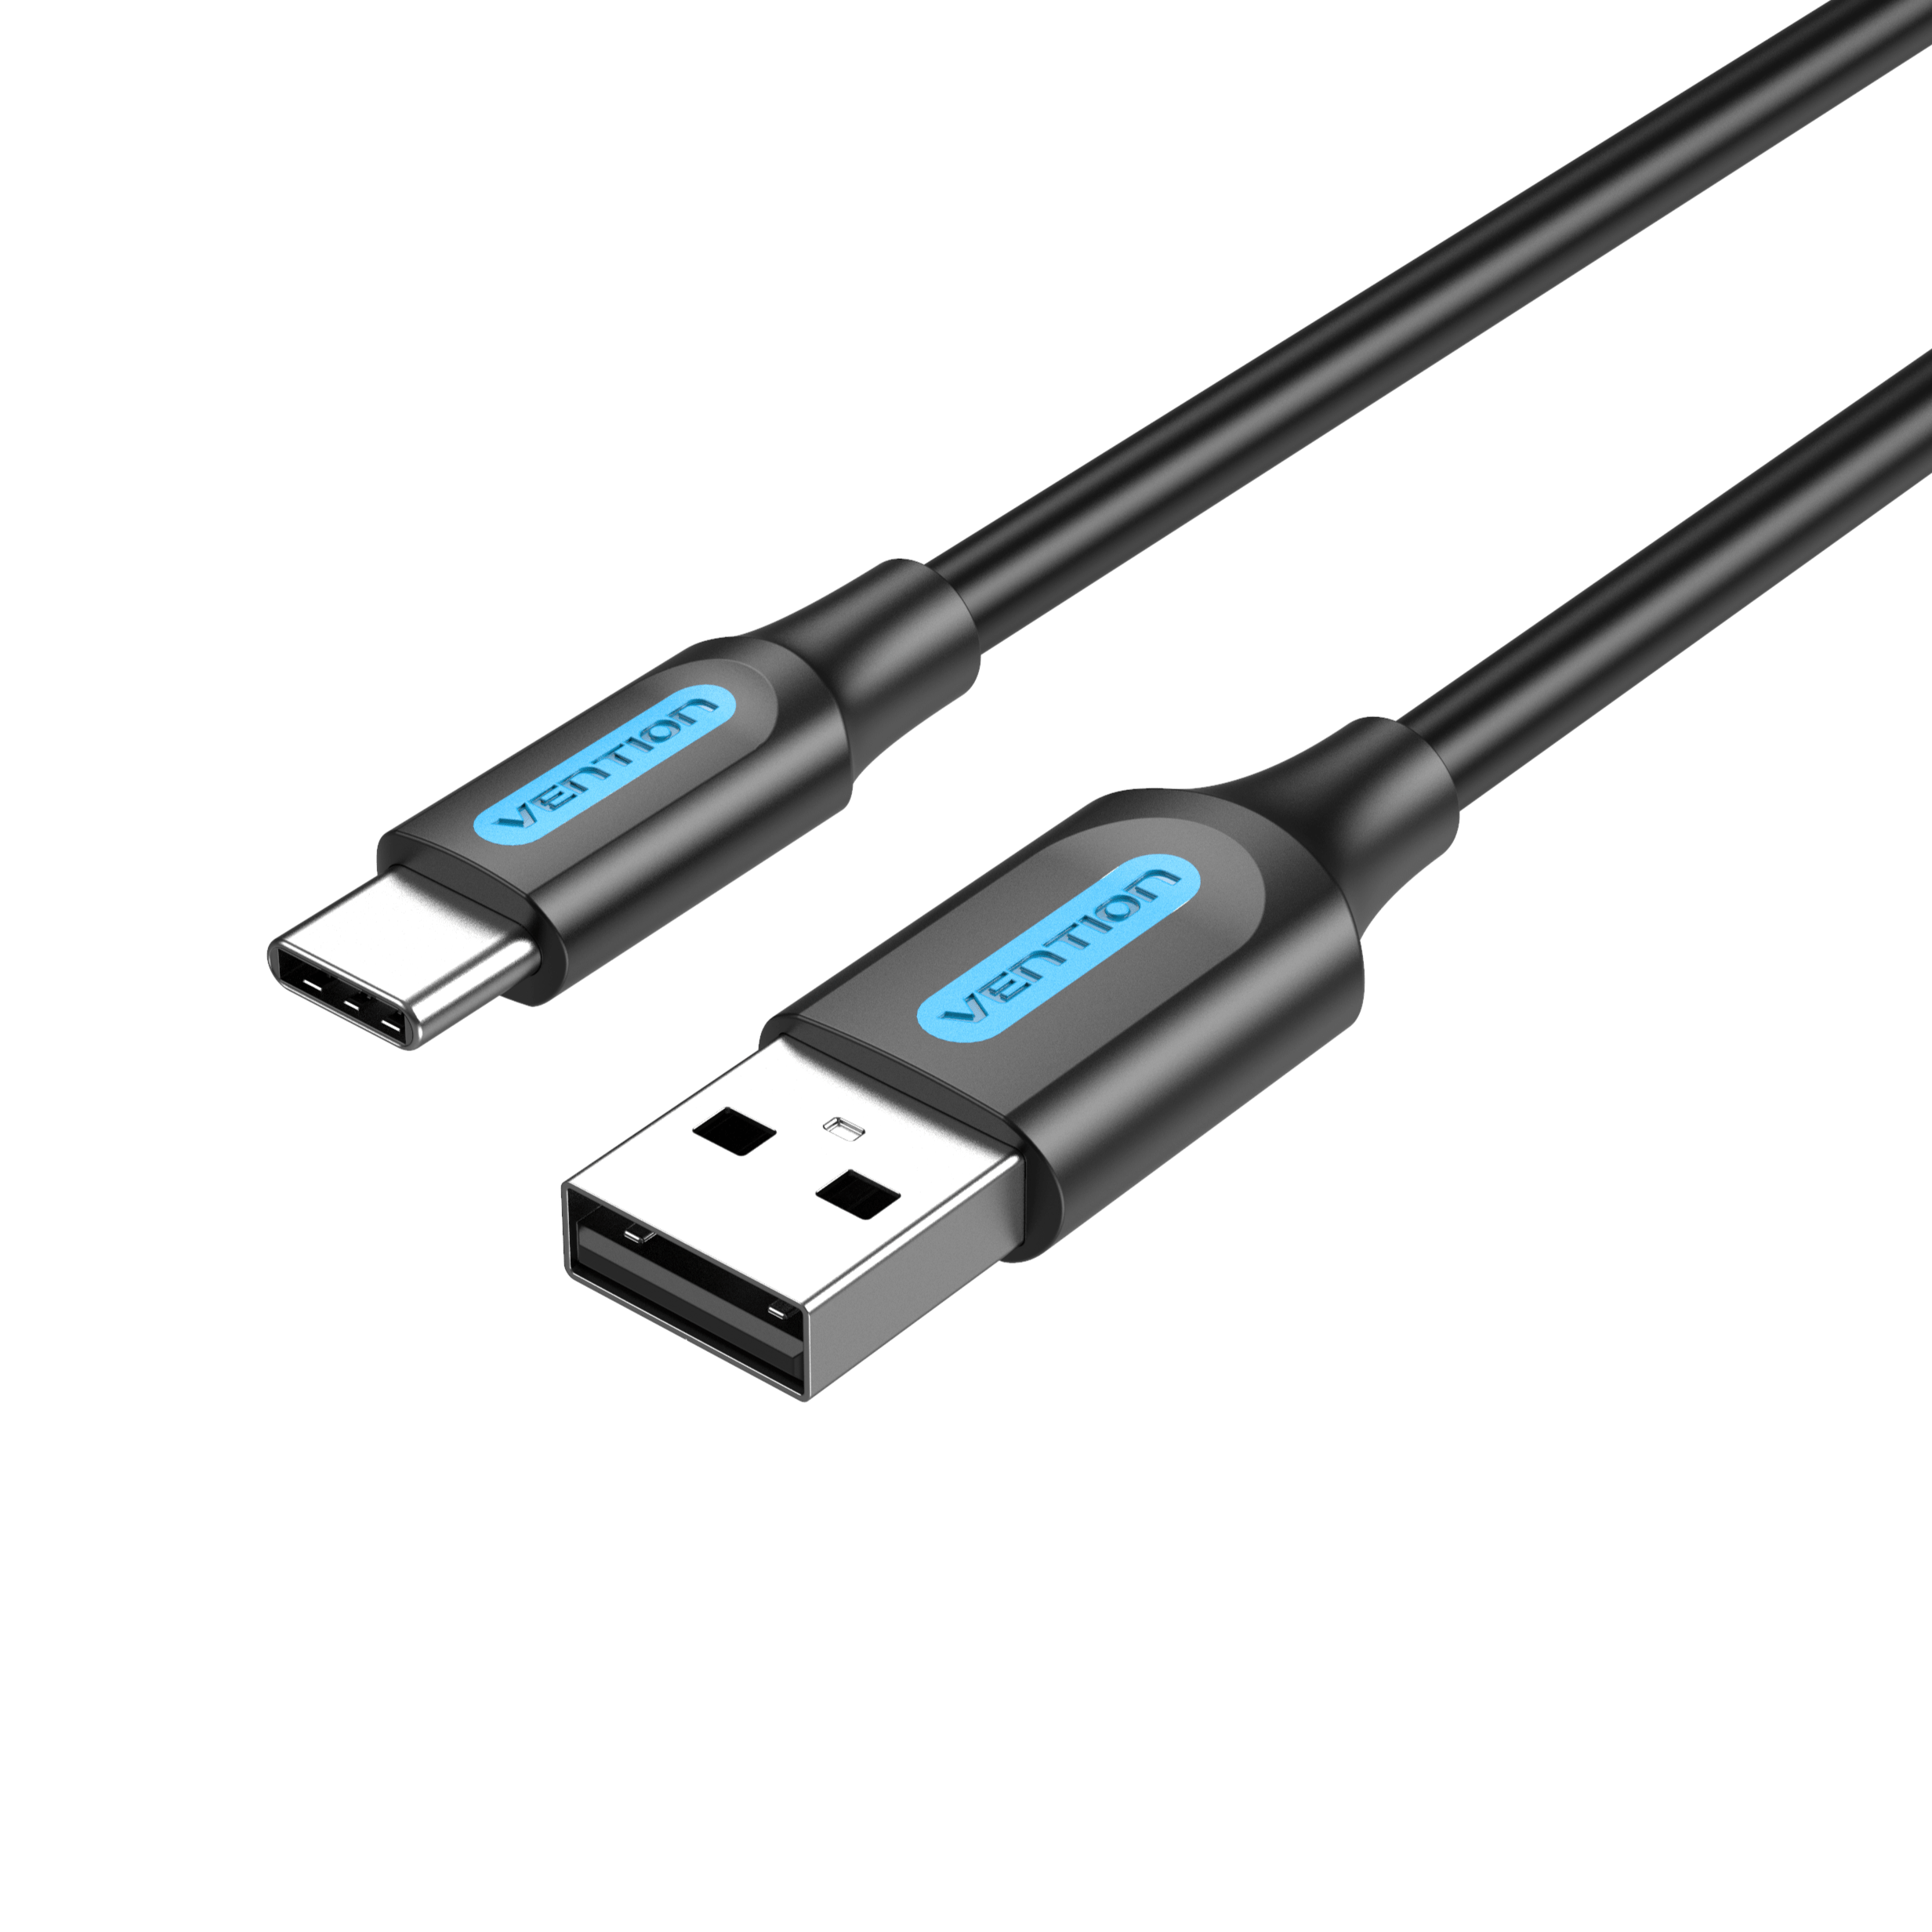 VENTION USB 2.0 A Male to C Male 3A Cable Black